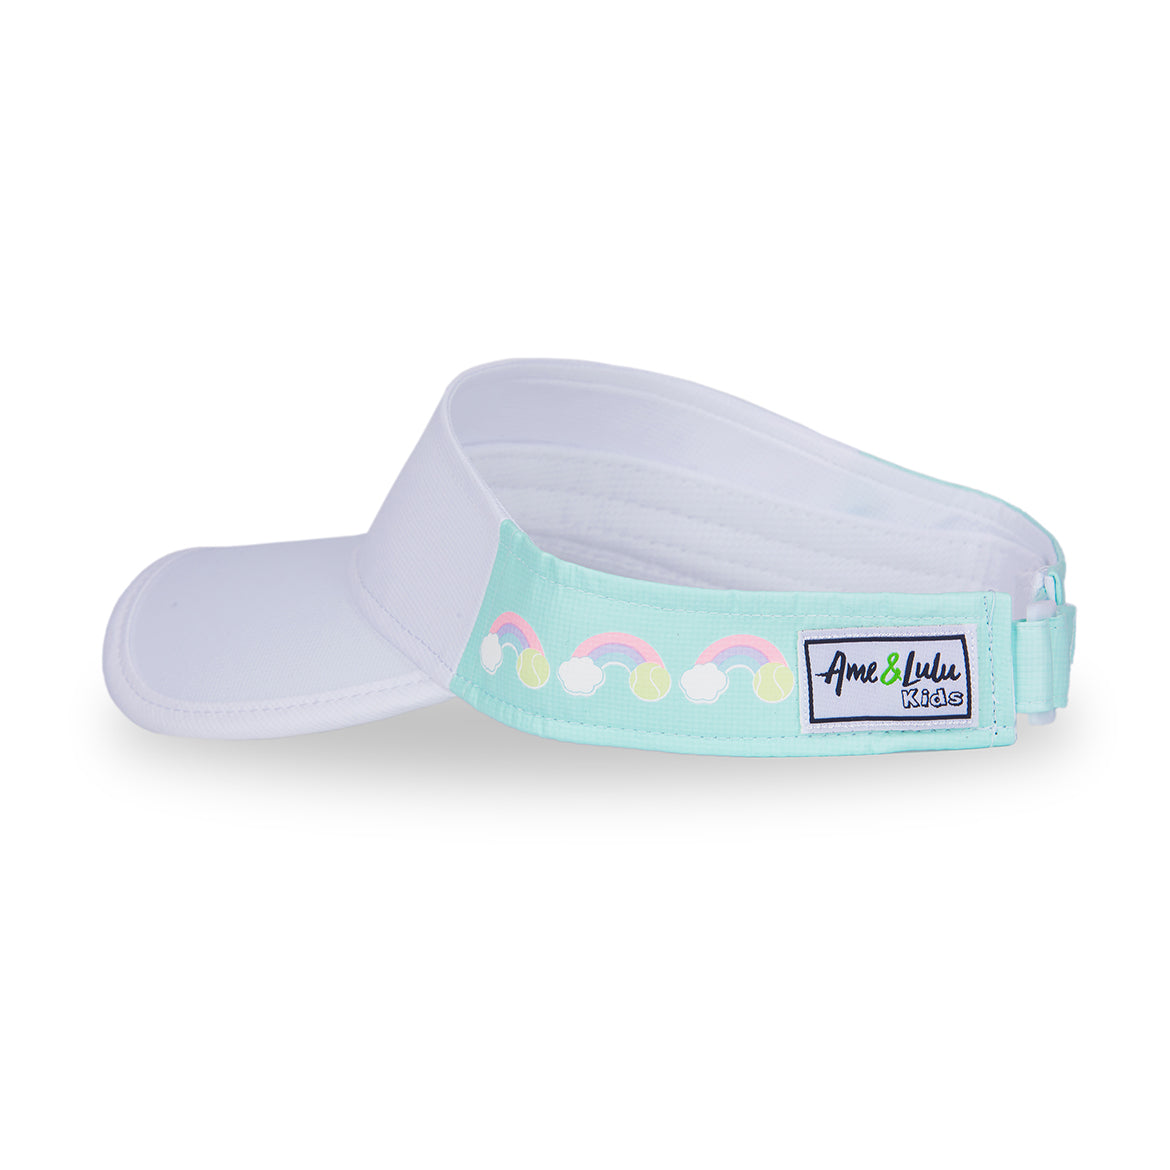 Side view of light blue kids visor with rainbows and tennis balls printed on the sides.